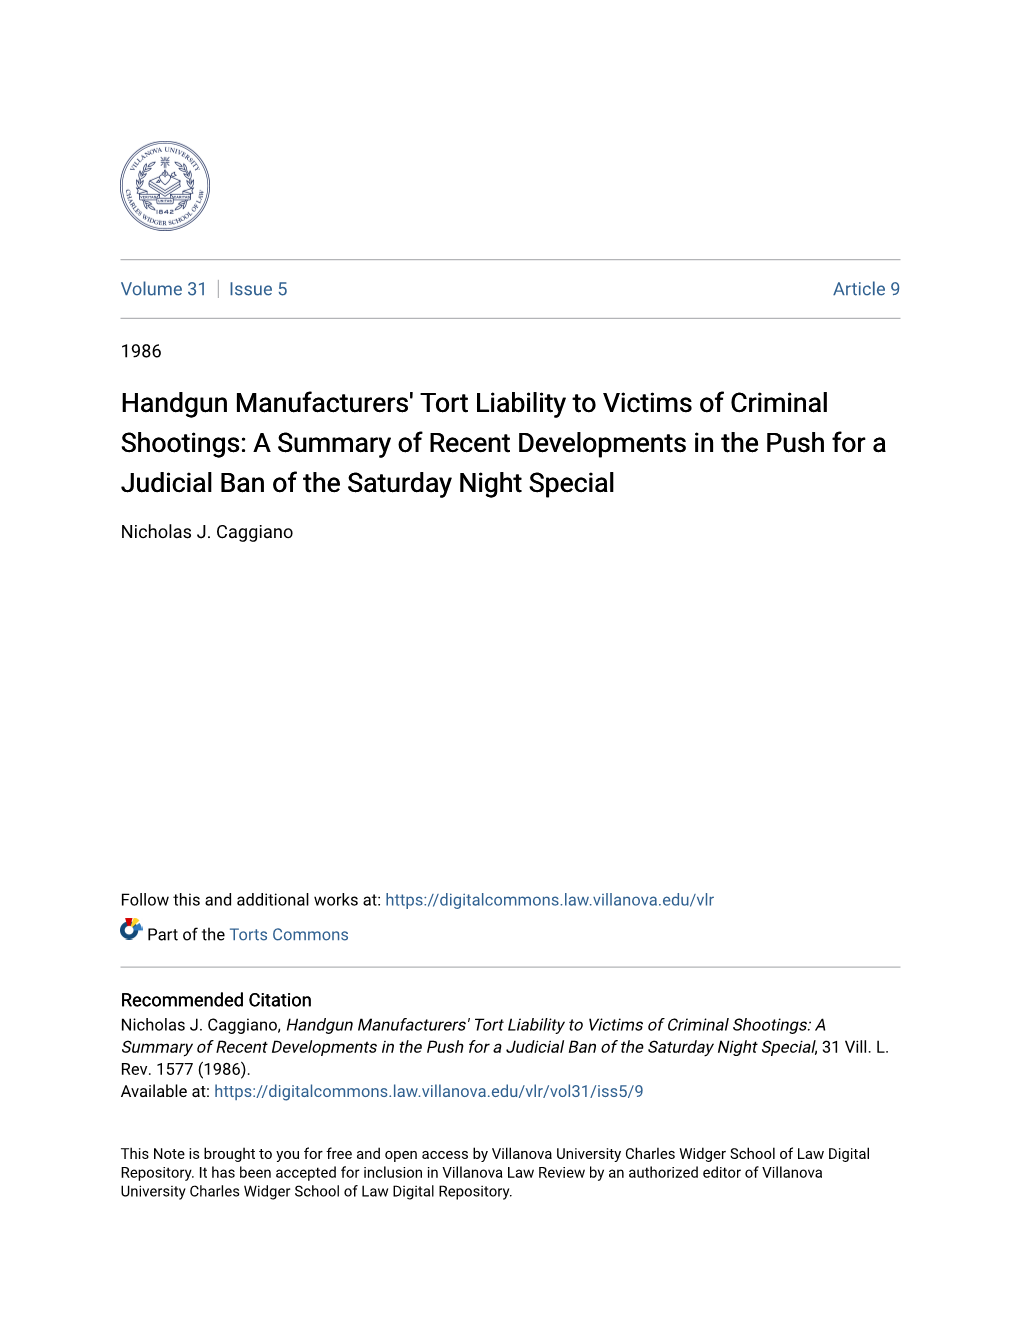 Handgun Manufacturers' Tort Liability to Victims of Criminal Shootings: a Summary of Recent Developments in the Push for a Judicial Ban of the Saturday Night Special